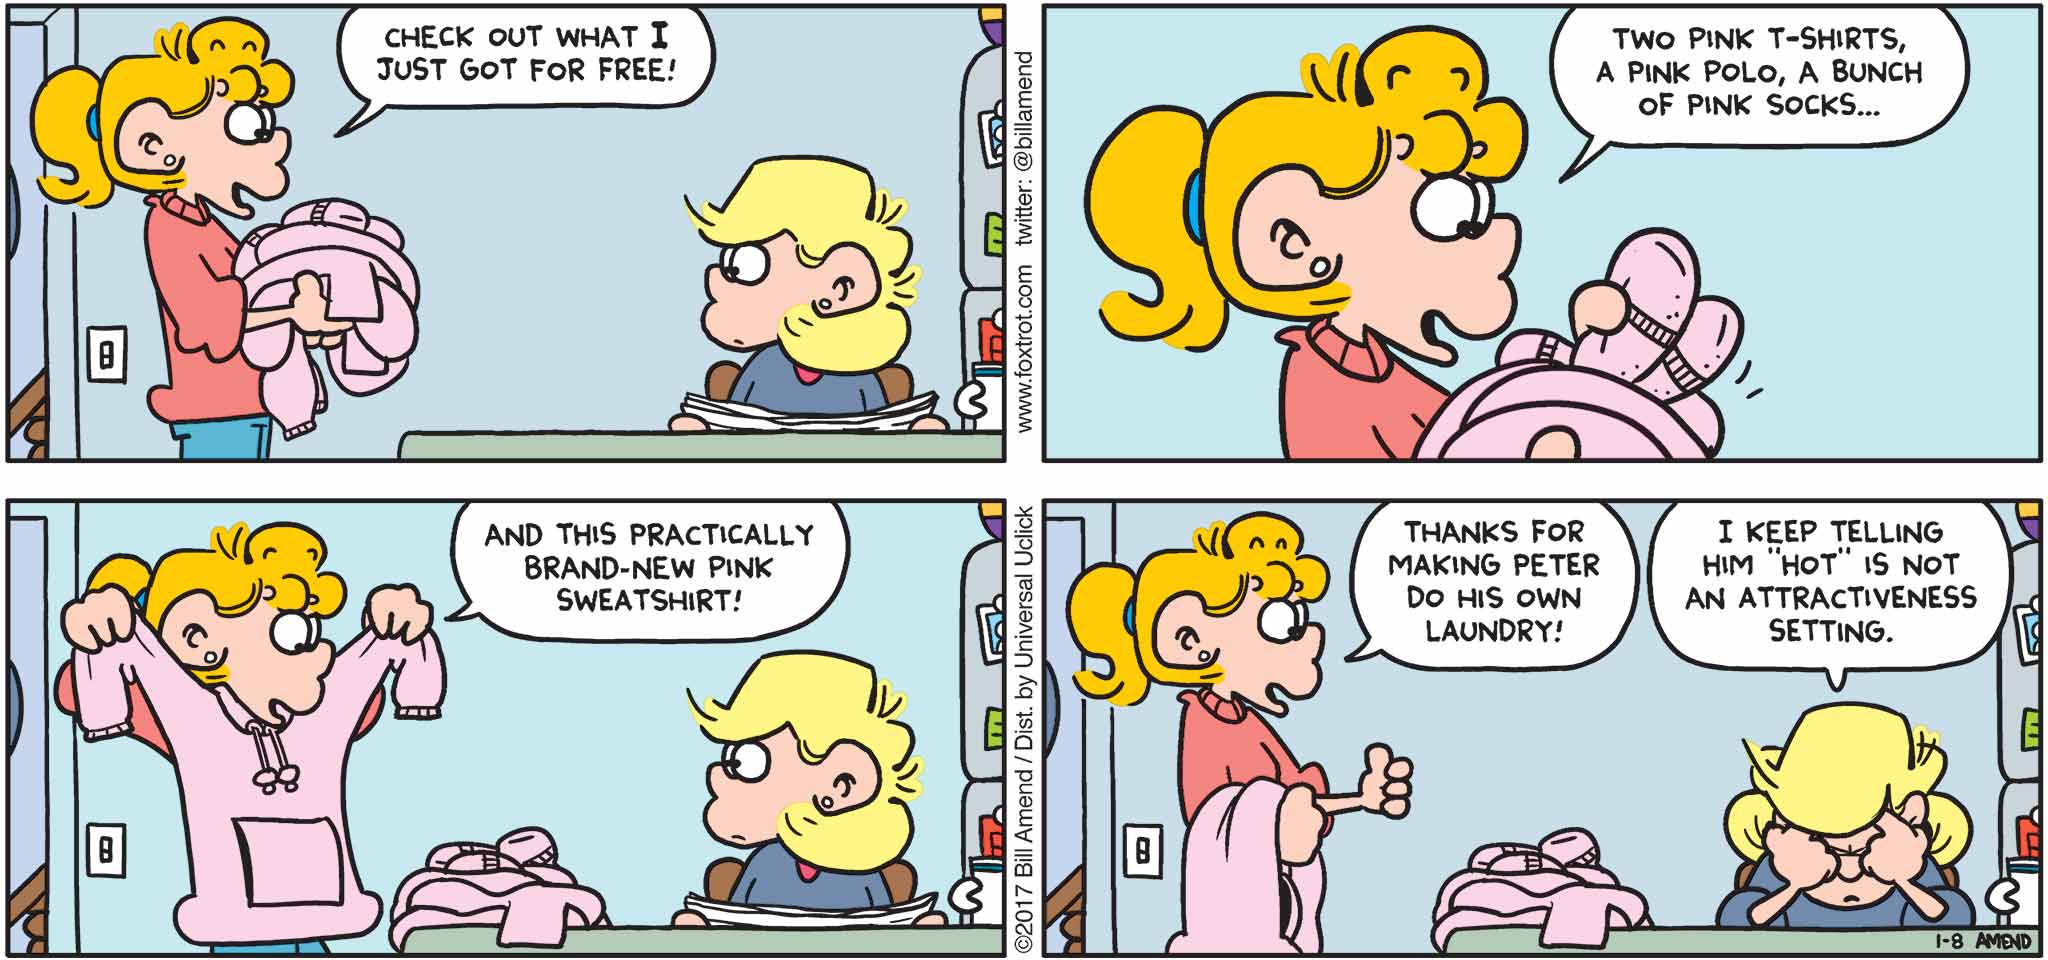 FoxTrot by Bill Amend - "Pink Clothes" published January 29, 2017 - Paige says: Check out what I just got for free! Two pink t-shirts, a pink polo, a bunch of pink socks... And this practically brand-new pink sweatshirt! Thanks for making Peter do his own laundry! Andy says: I keep telling him "hot" is not an attractiveness setting.